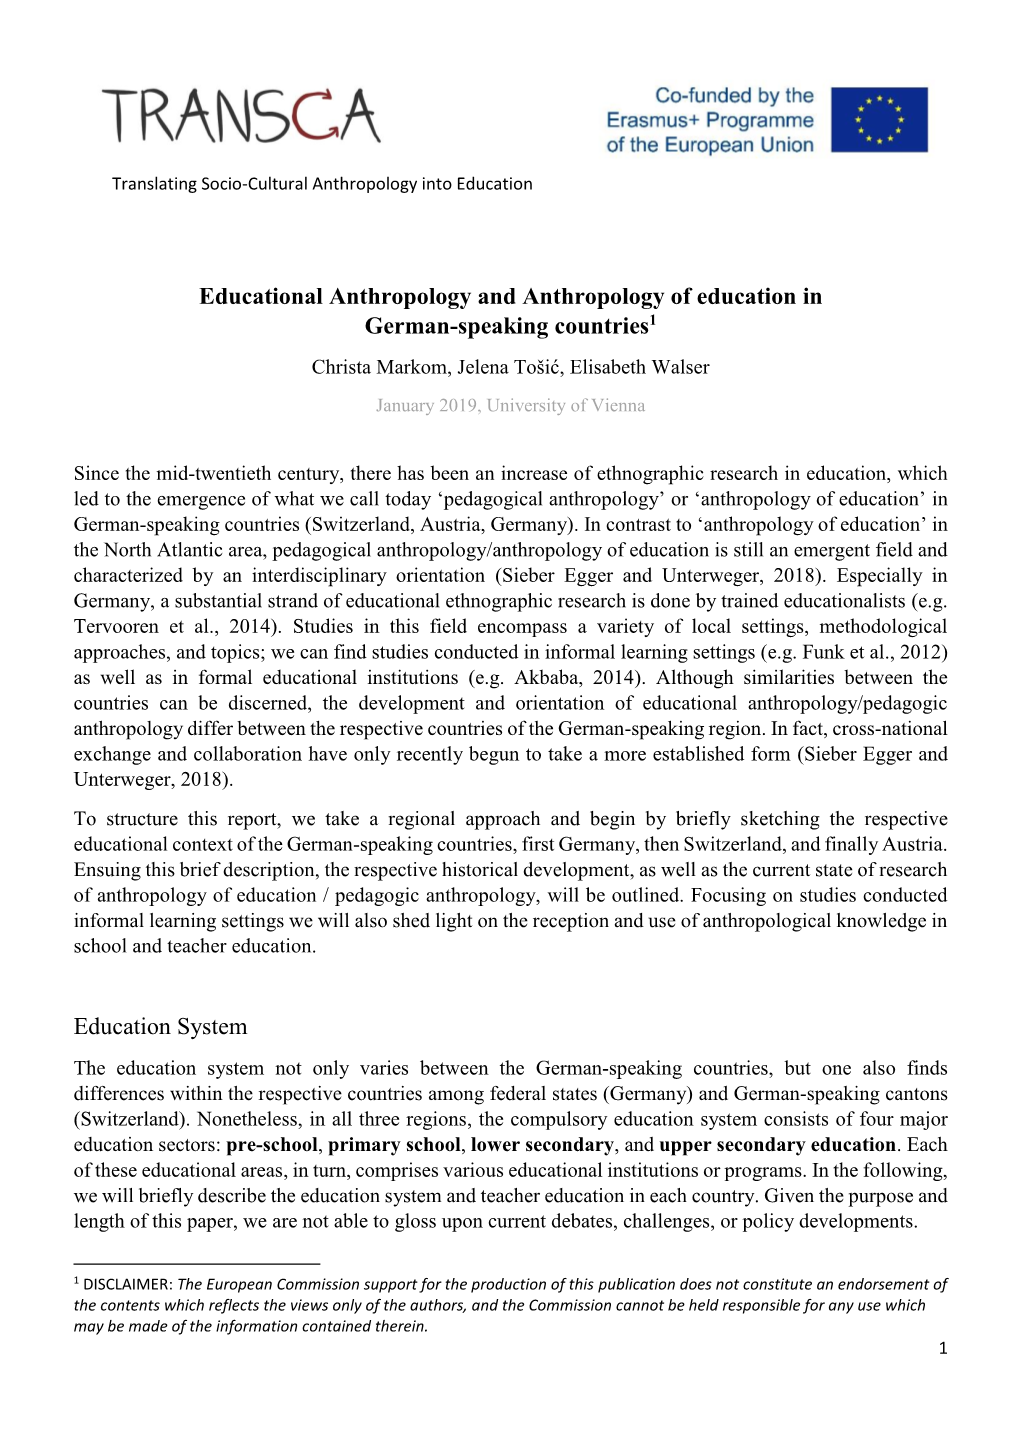 Educational Anthropology and Anthropology of Education In